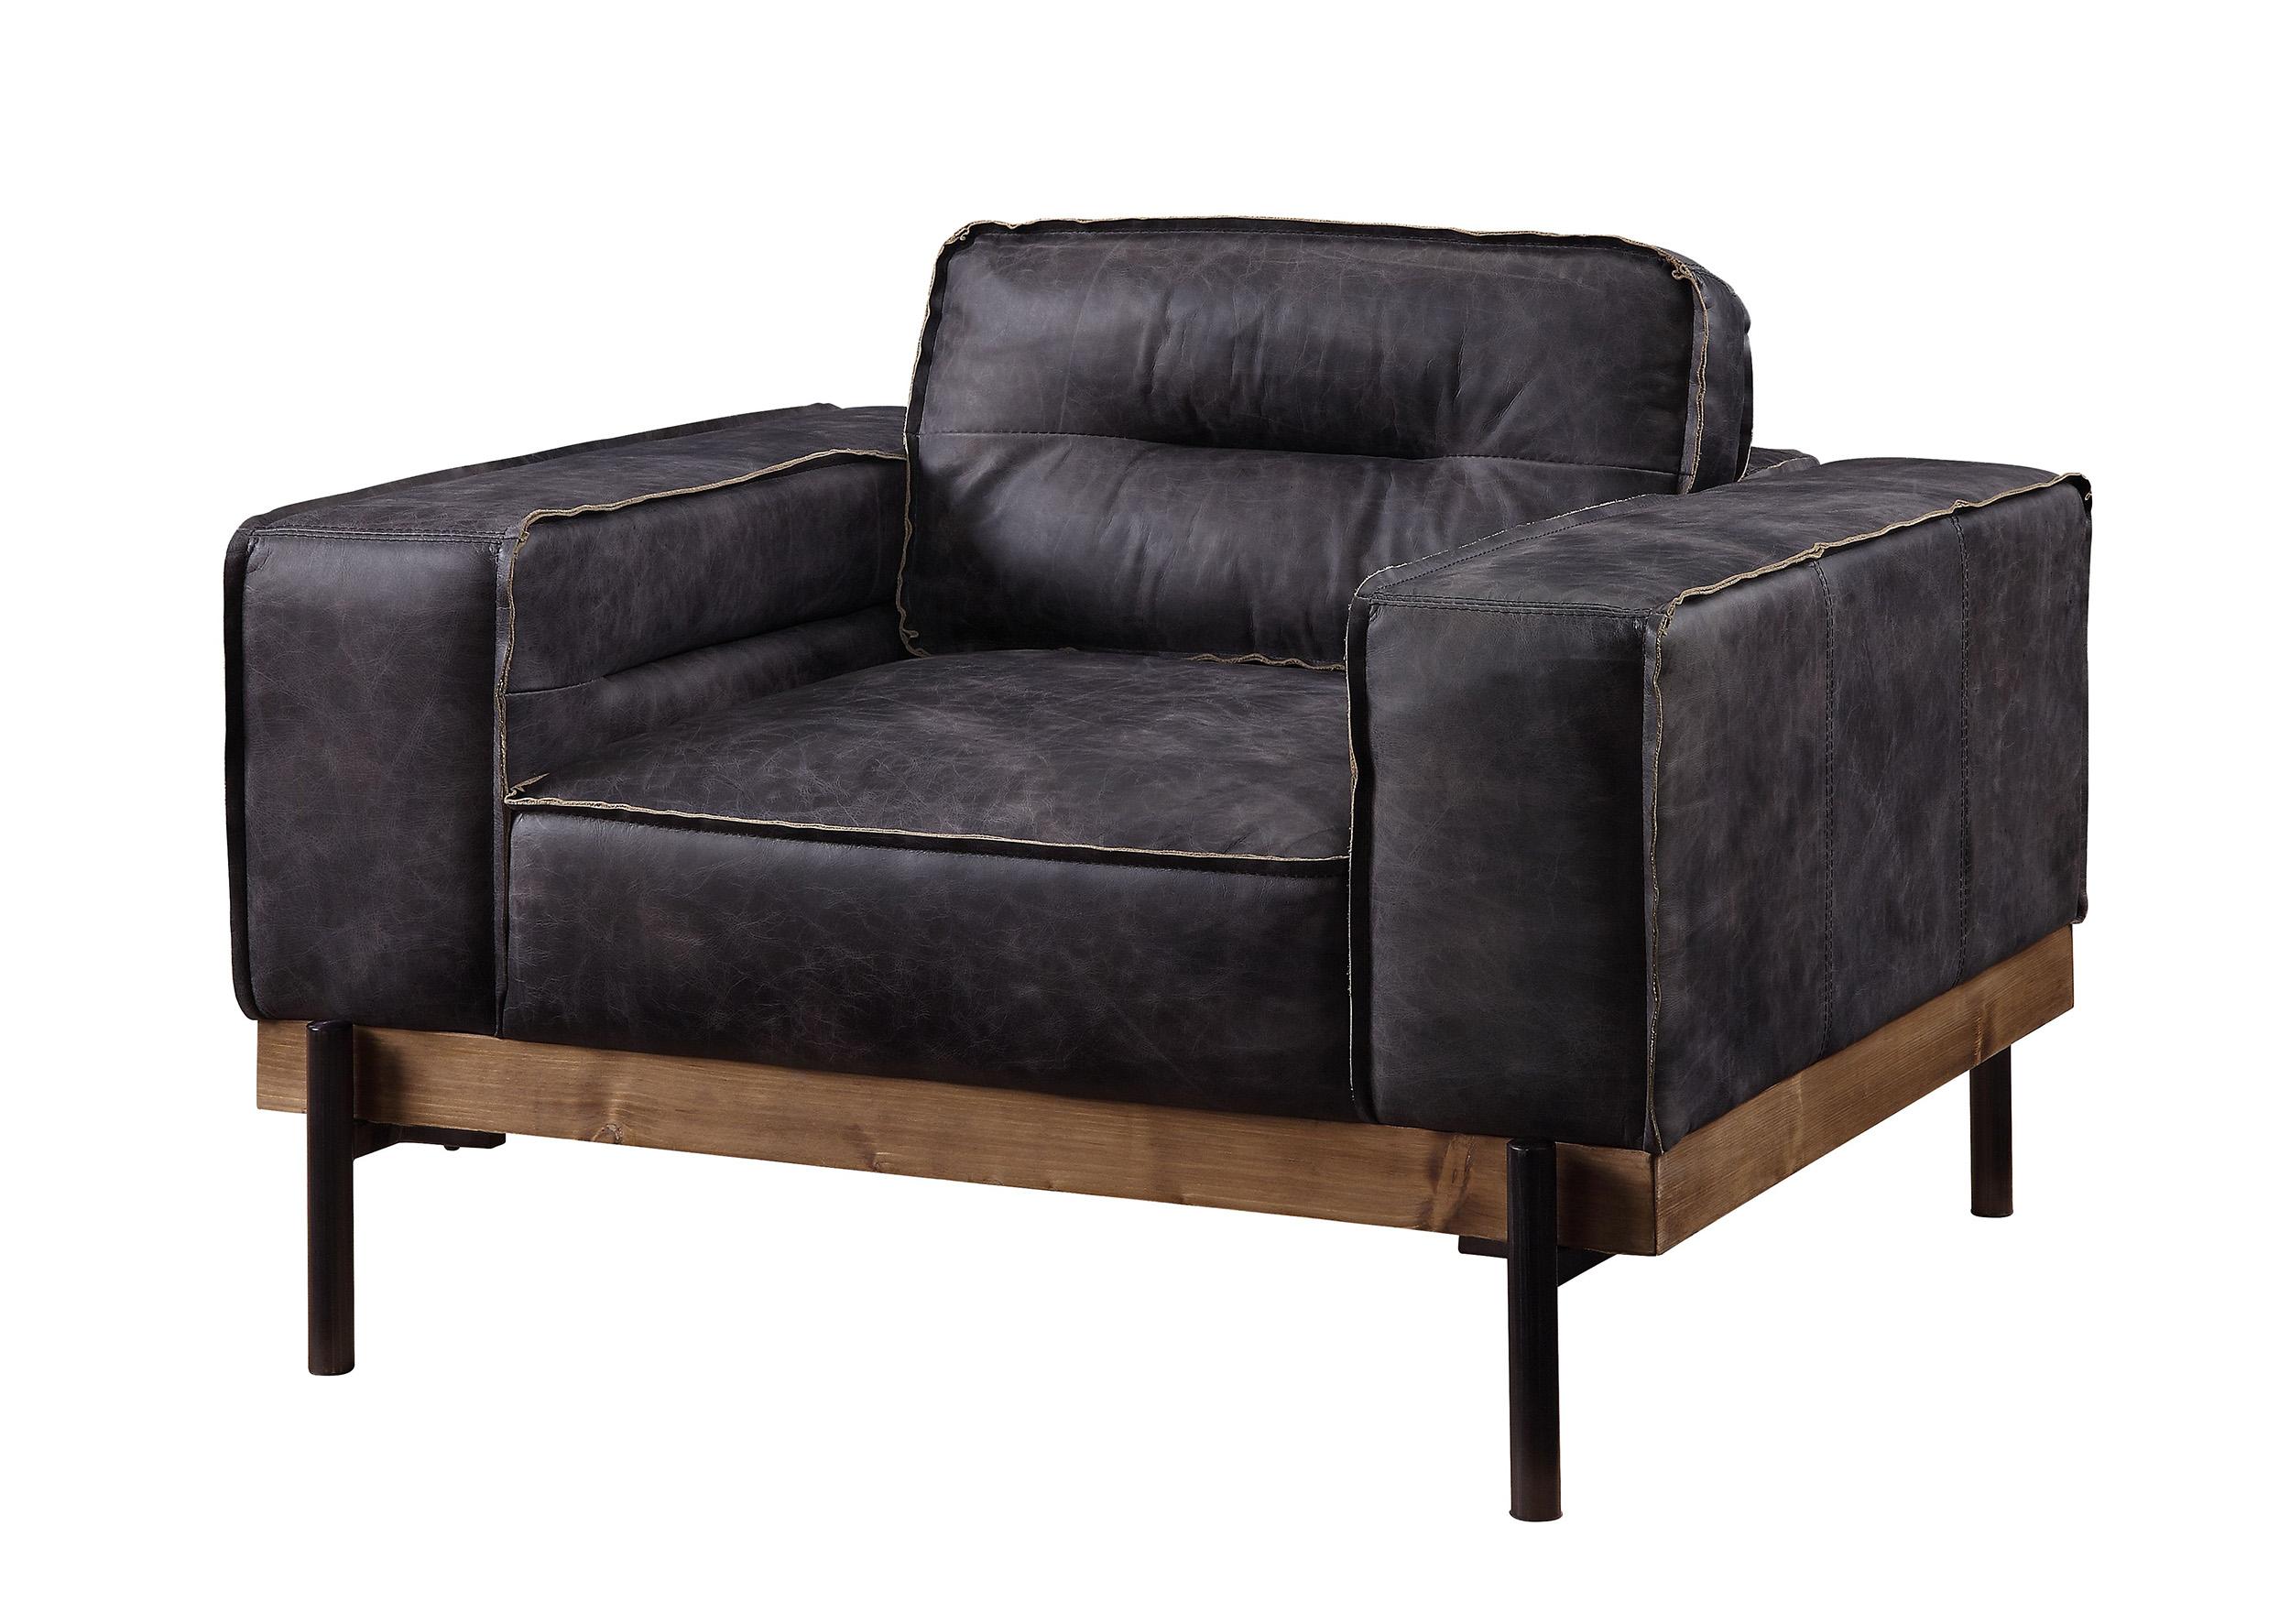 Contemporary,  Vintage Oversized Chair Gunter SKU: W003091038 in Ebony, Antique Top grain leather